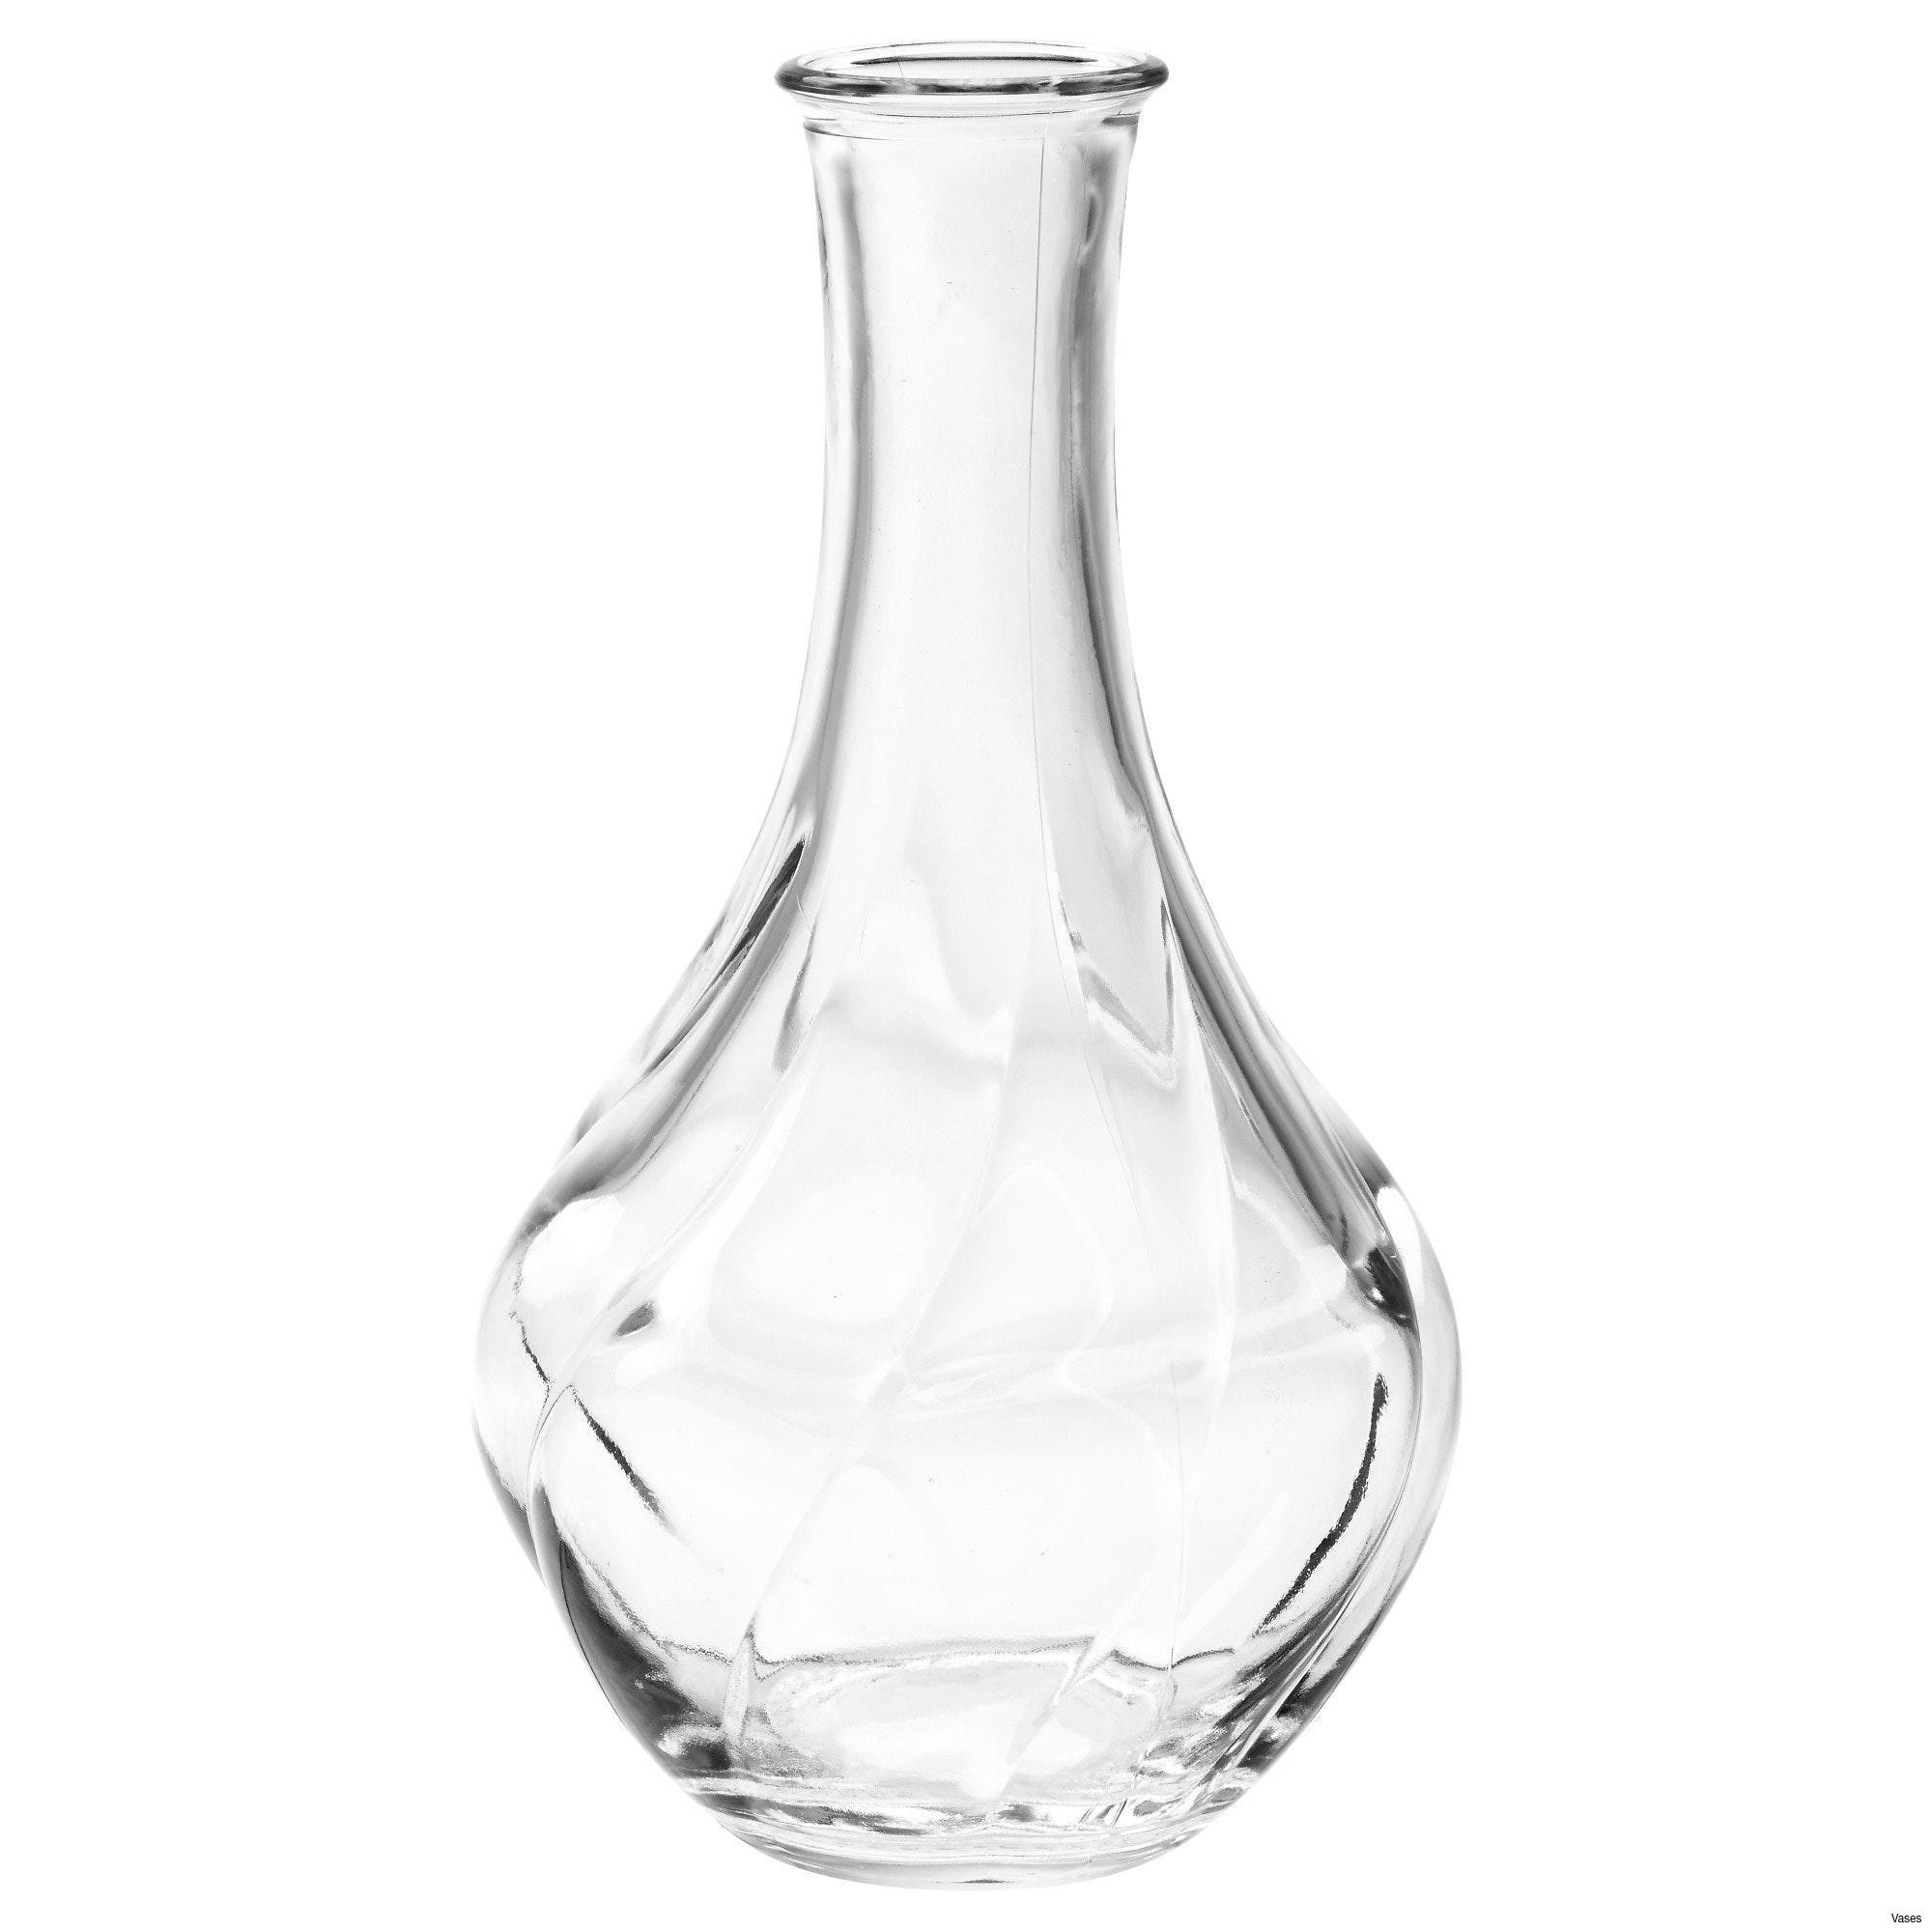 19 Fashionable Antique Waterford Crystal Vases 2022 free download antique waterford crystal vases of large crystal vase pictures living room glass vases fresh clear vase for large crystal vase pictures living room glass vases fresh clear vase 0d tags amazi